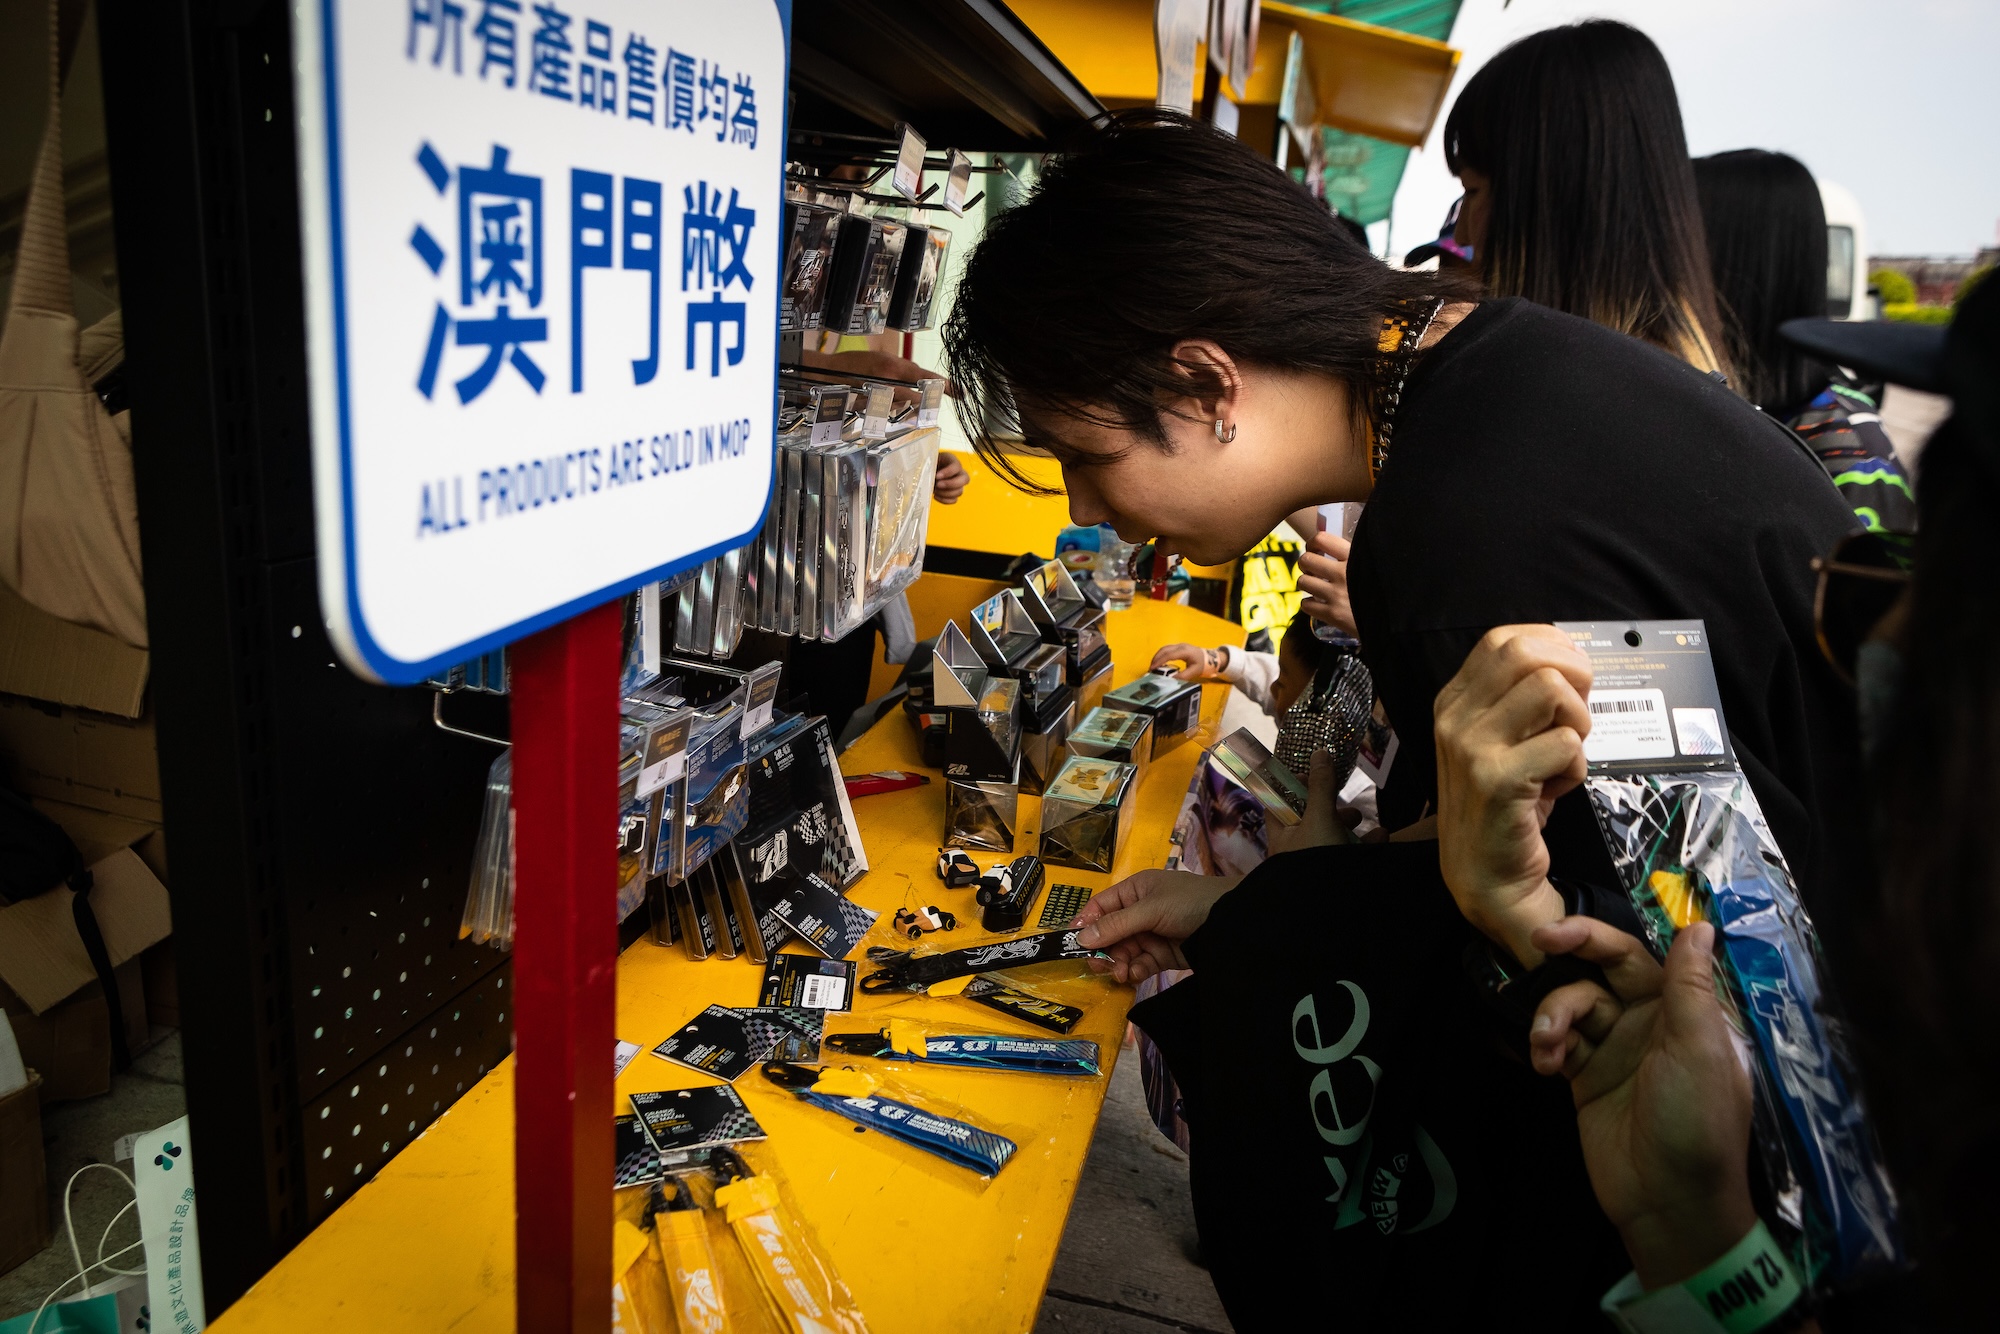 A member of the public looks at souvenirs offered for sale